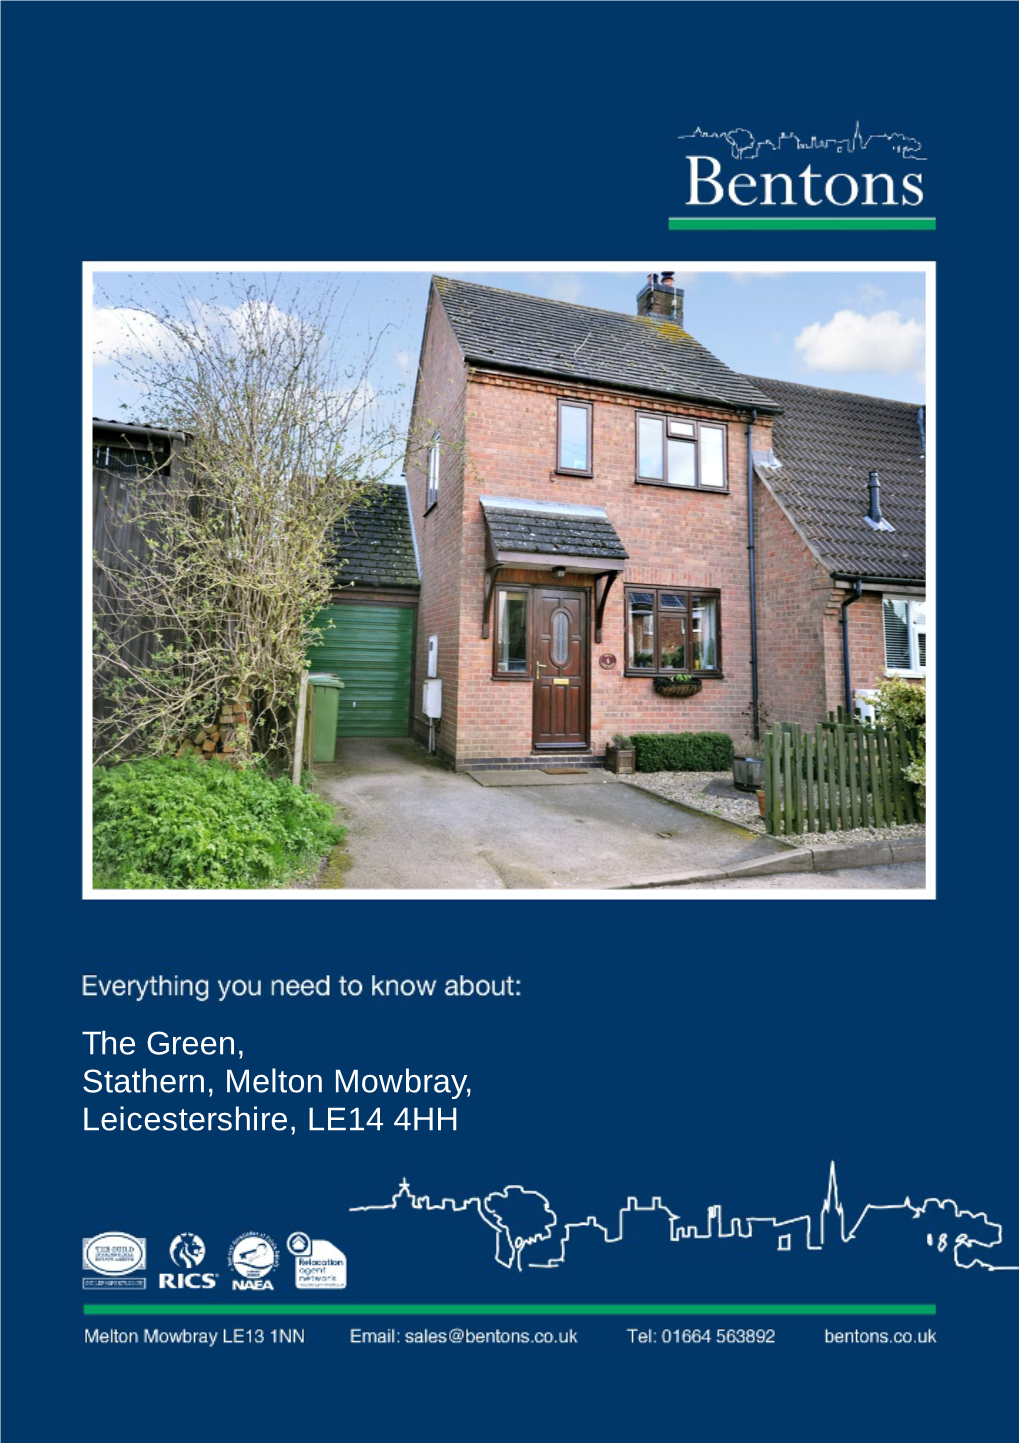 The Green, Stathern, Melton Mowbray, Leicestershire, LE14 4HH